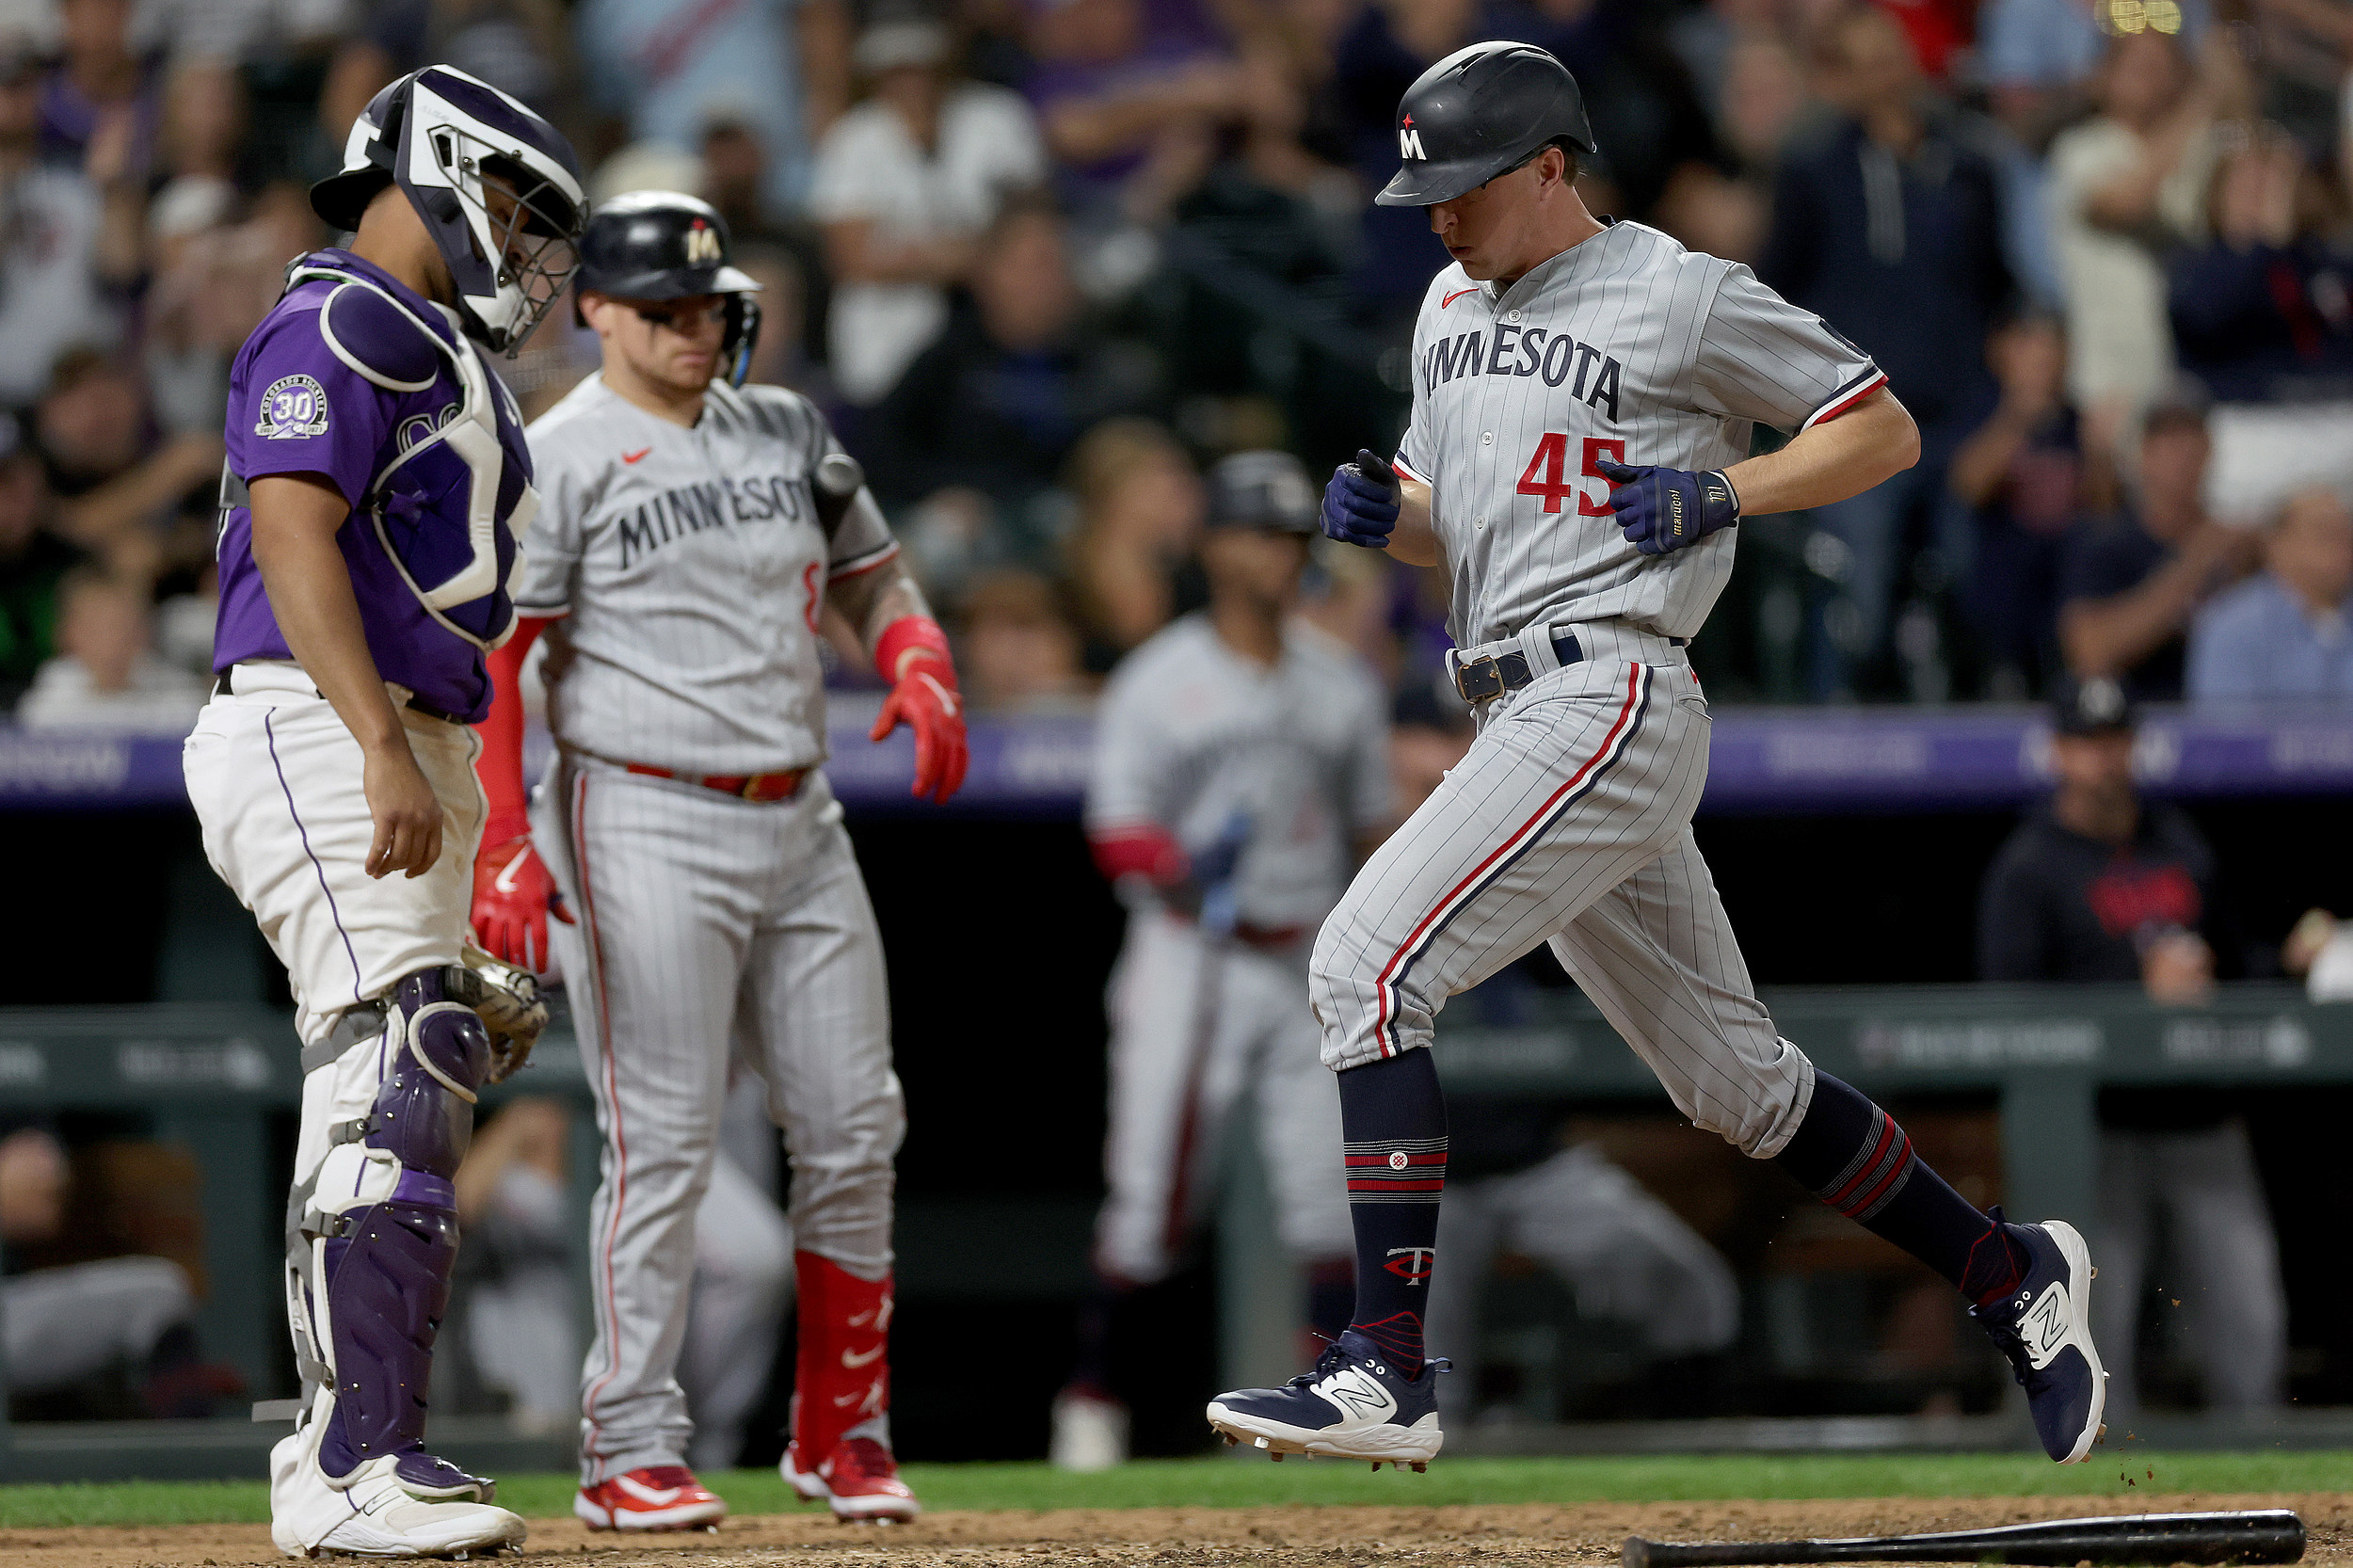 The Minnesota Twins are opening a gap in the AL Central. Can they